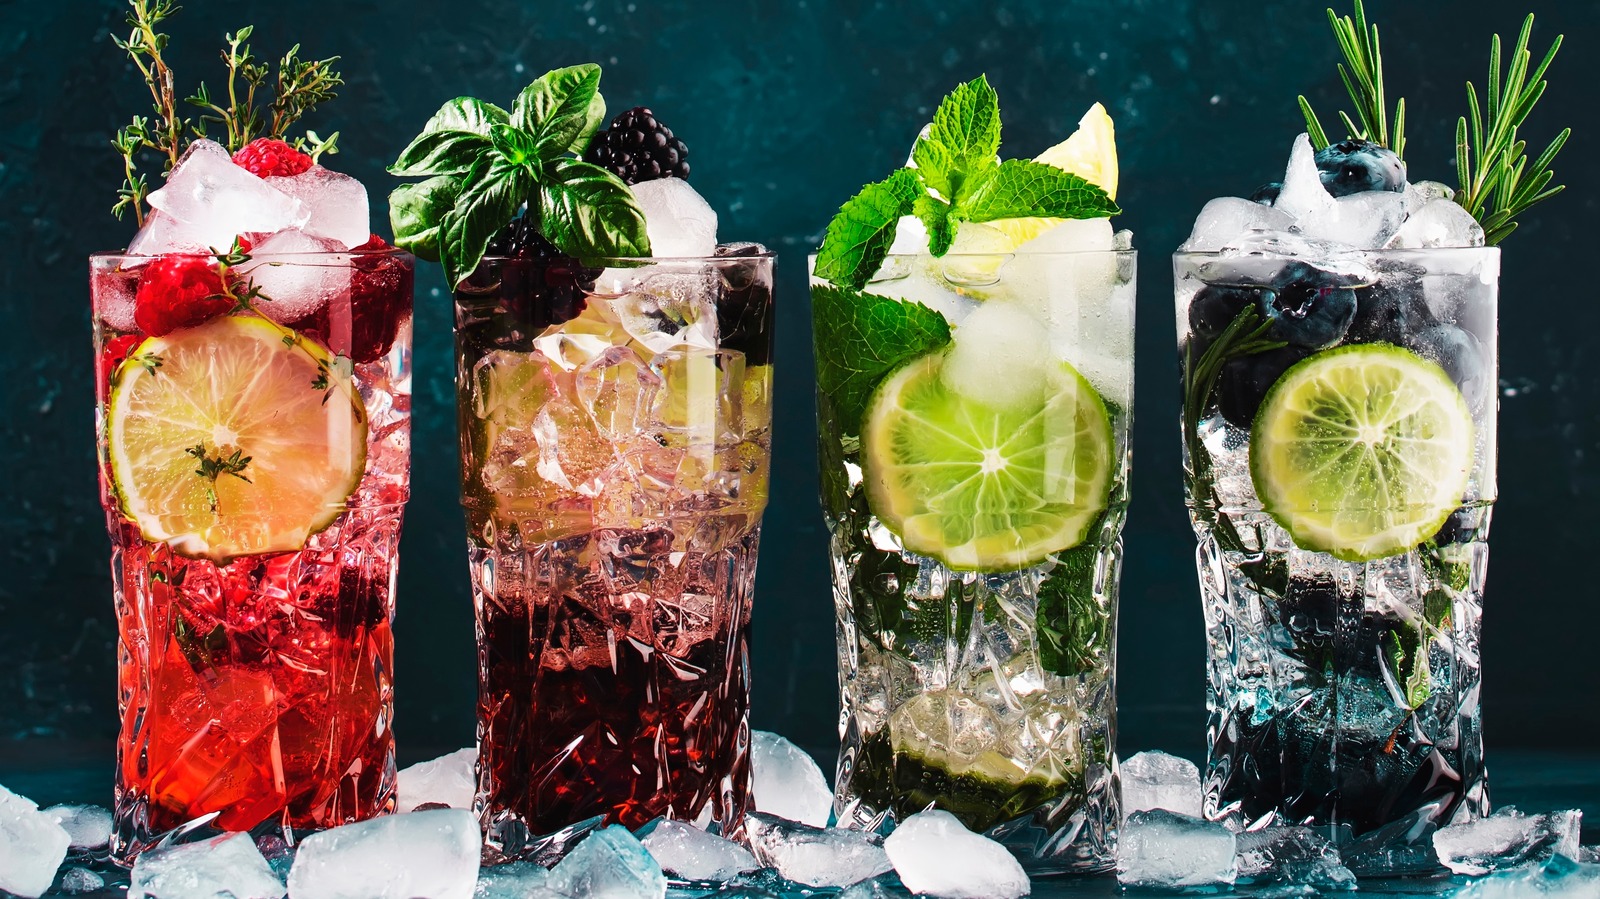 https://www.thedailymeal.com/img/gallery/elevate-your-cocktail-game-by-using-the-right-type-of-ice/l-intro-1679513319.jpg